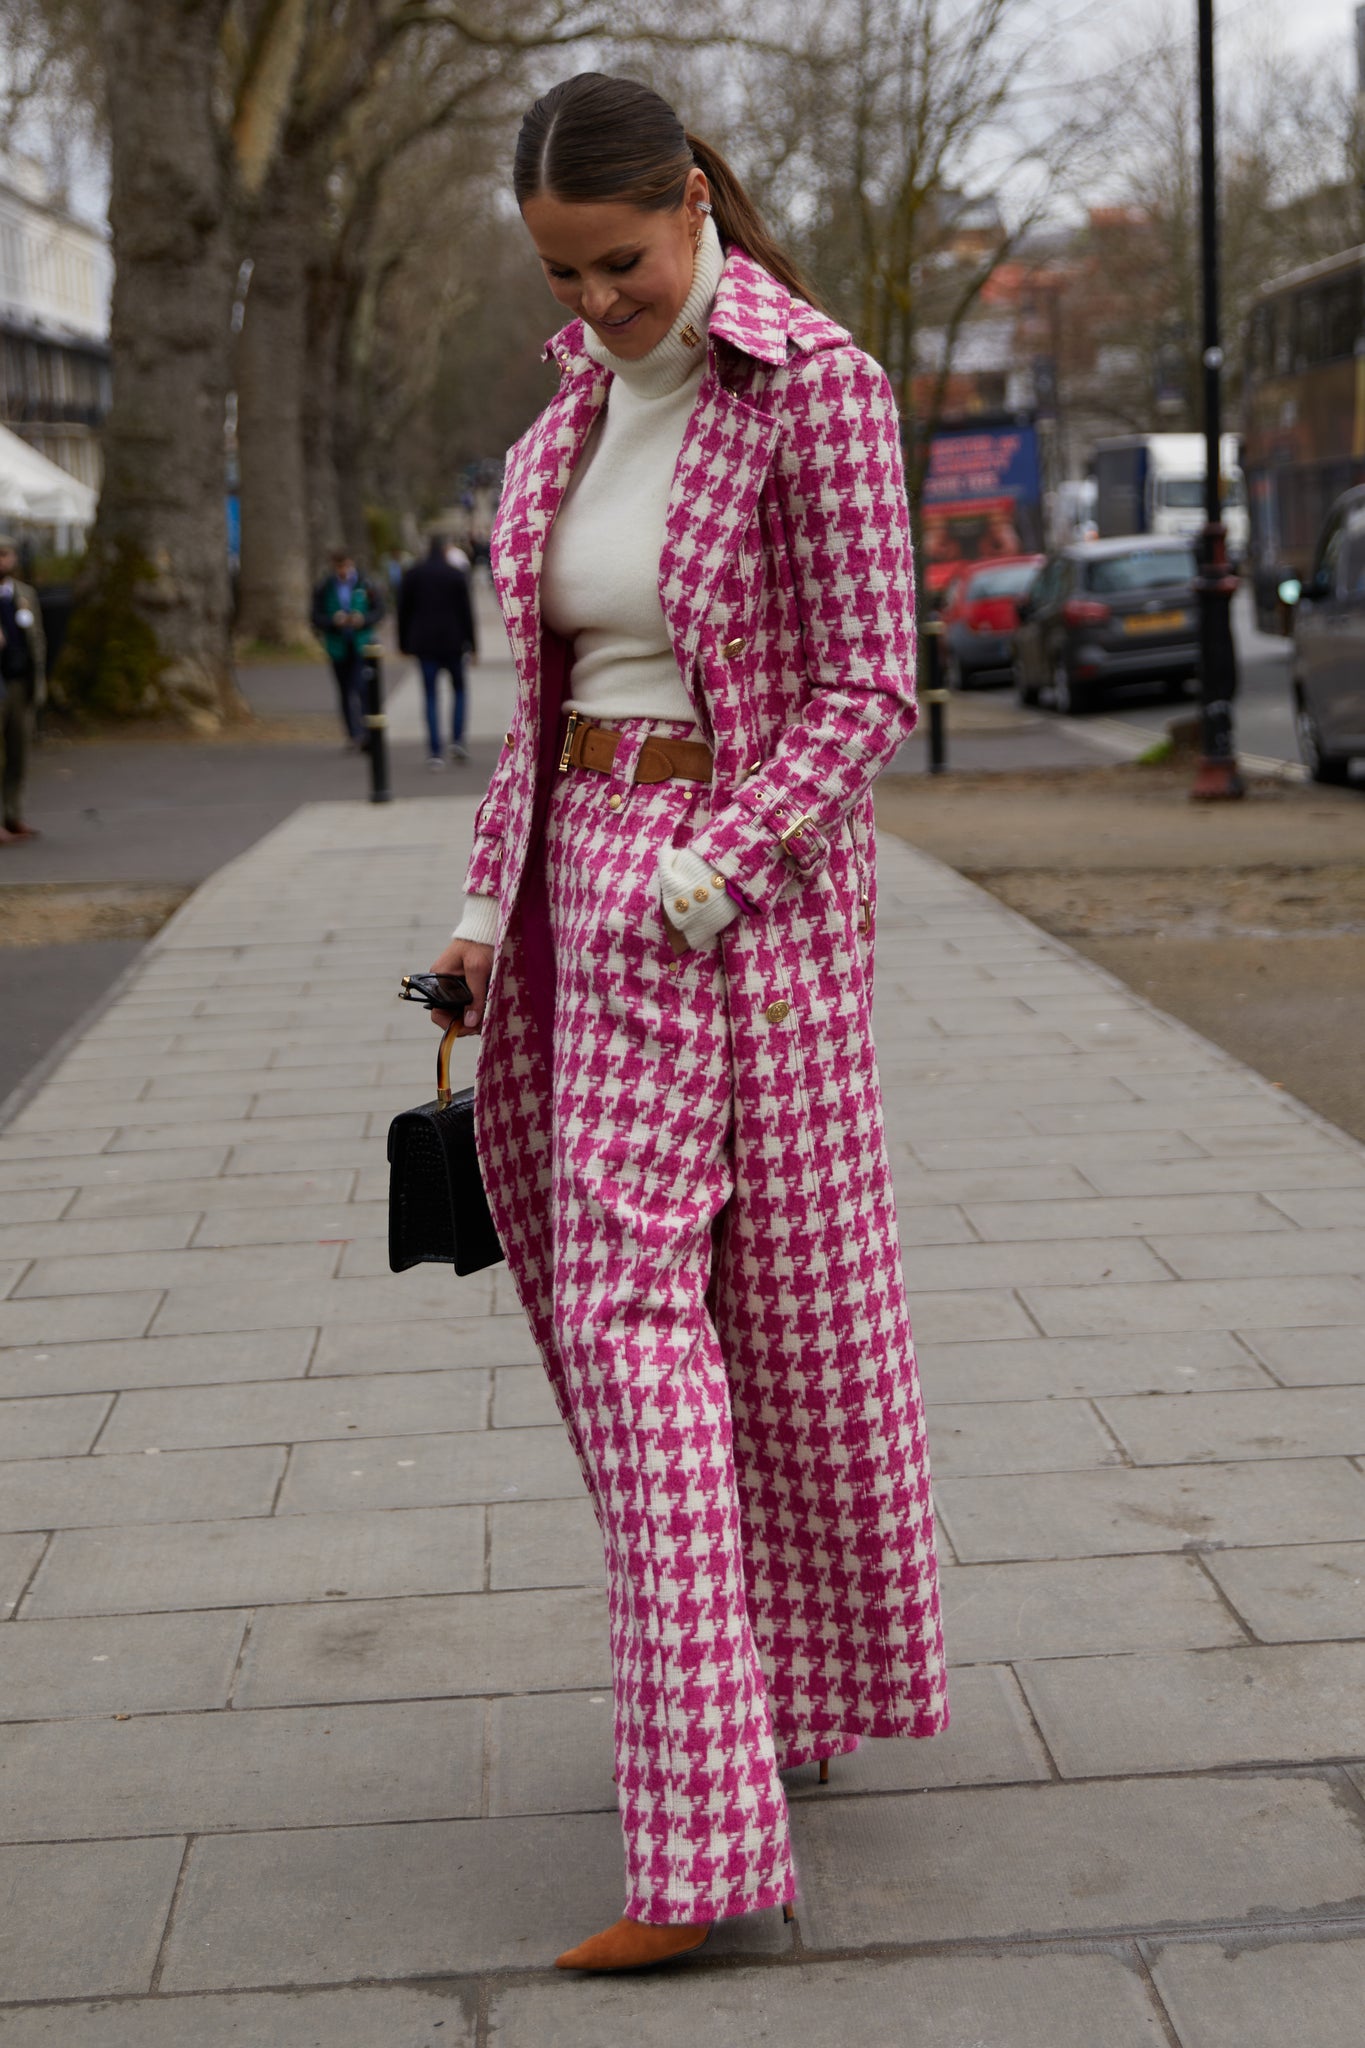 Women's hot pink houndstooth wool high waisted straight trousers with white roll neck top, tan suede belt and hot pink houndstooth trench coat